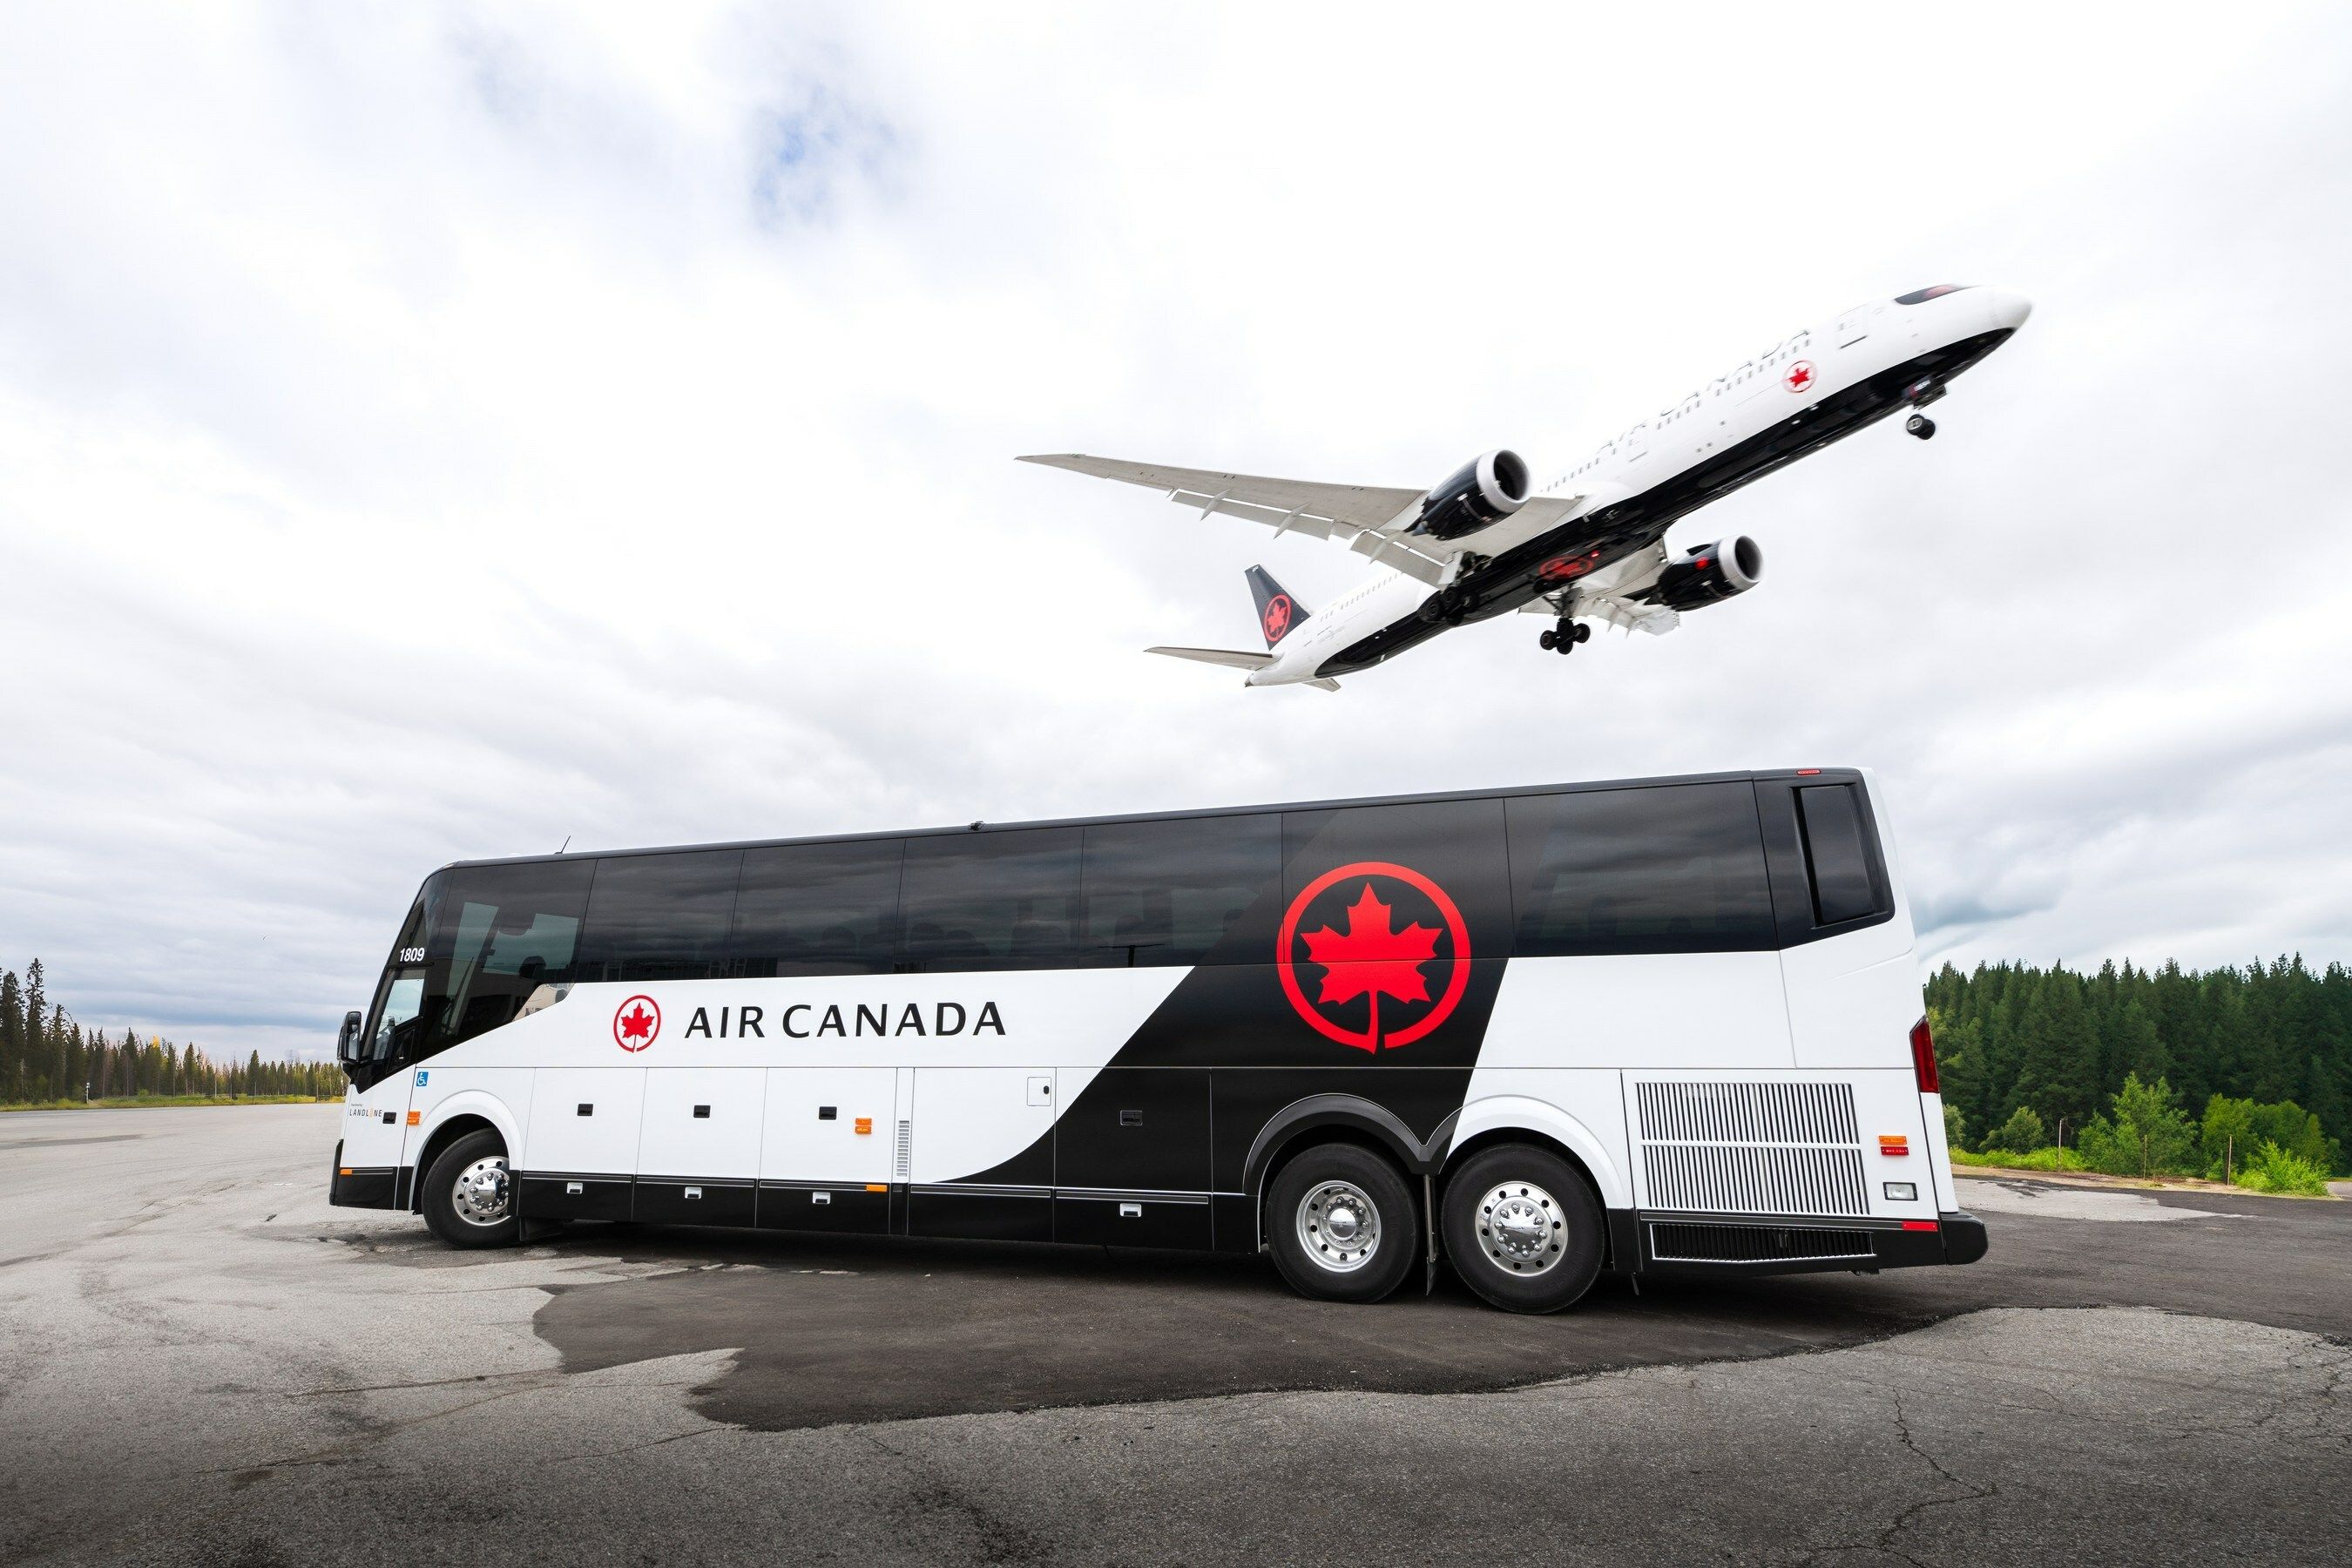 Air Canada Motorcoach With Aircraft Taking Off Overhead